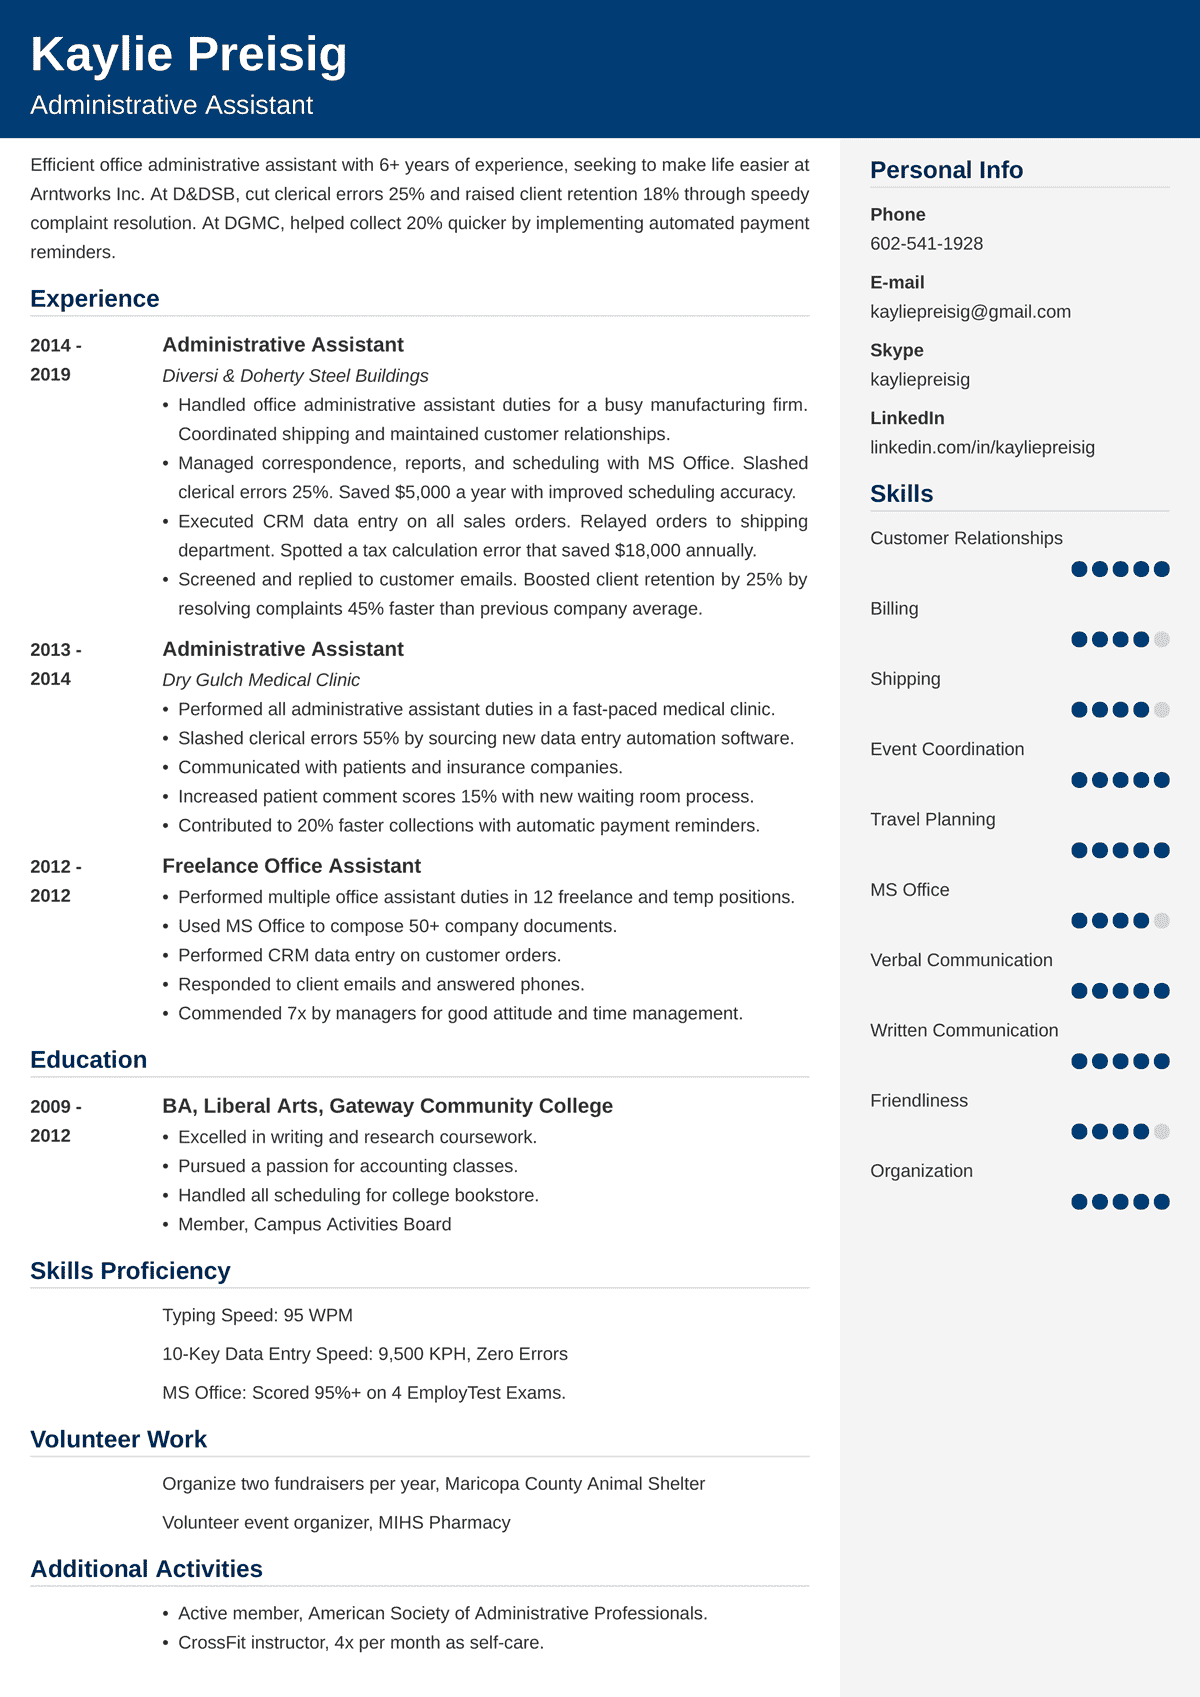 administrative assistant resume profile